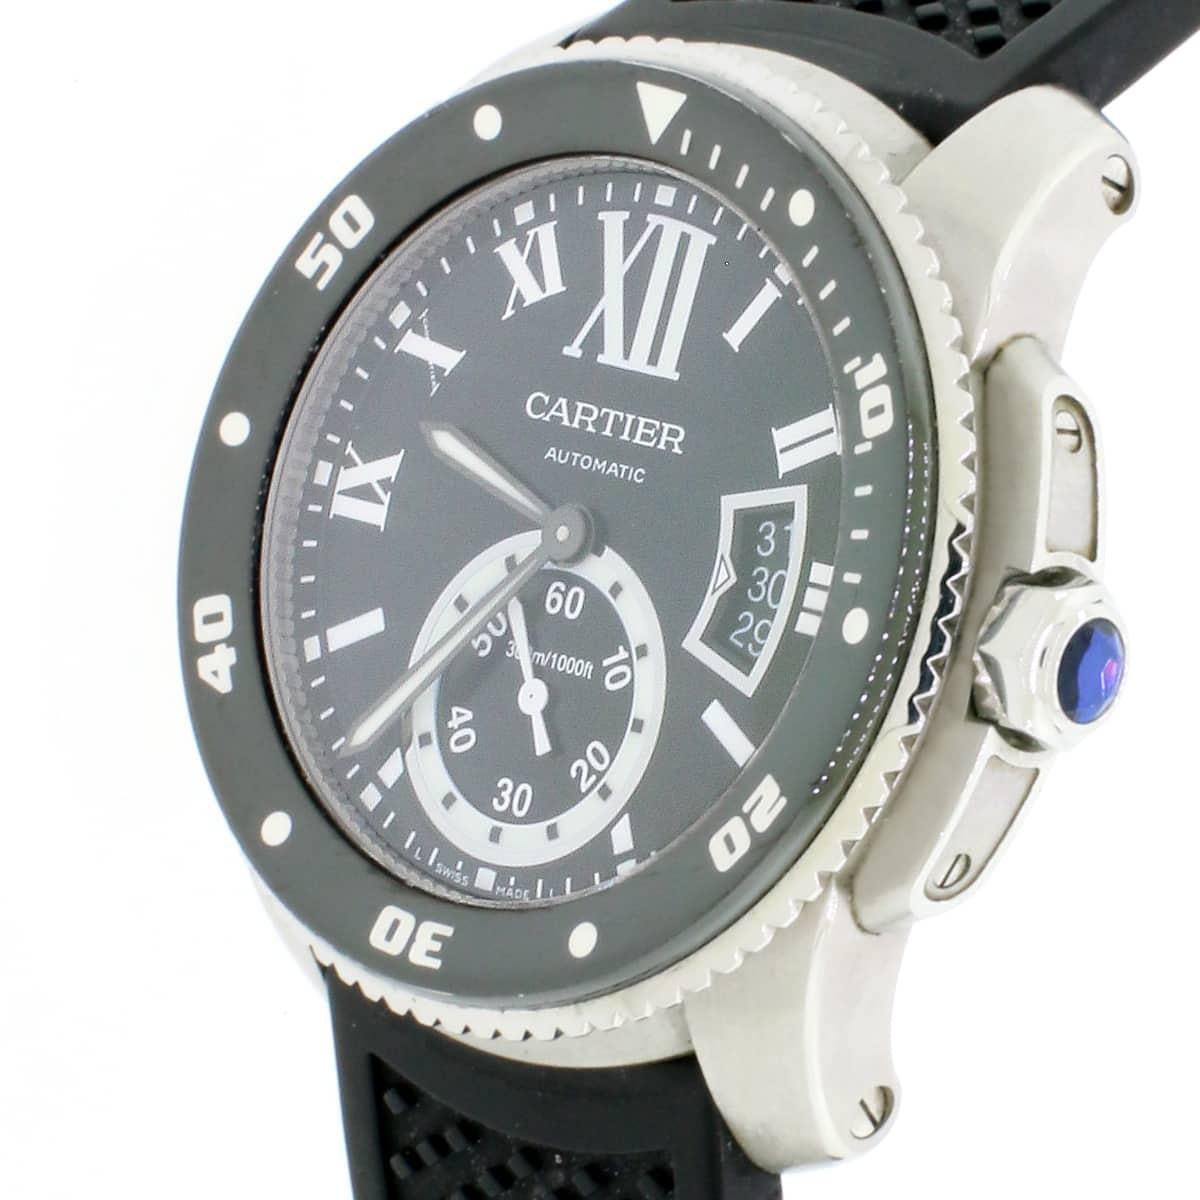 Calibre de Cartier Diver watch, Manufacture mechanical self-winding movement, caliber 1904-PS MC. Steel case. ADLC-coated steel bezel with indicator in Super-LumiNova, faceted crown set with a faceted synthetic spinel. Black dial snailed in part